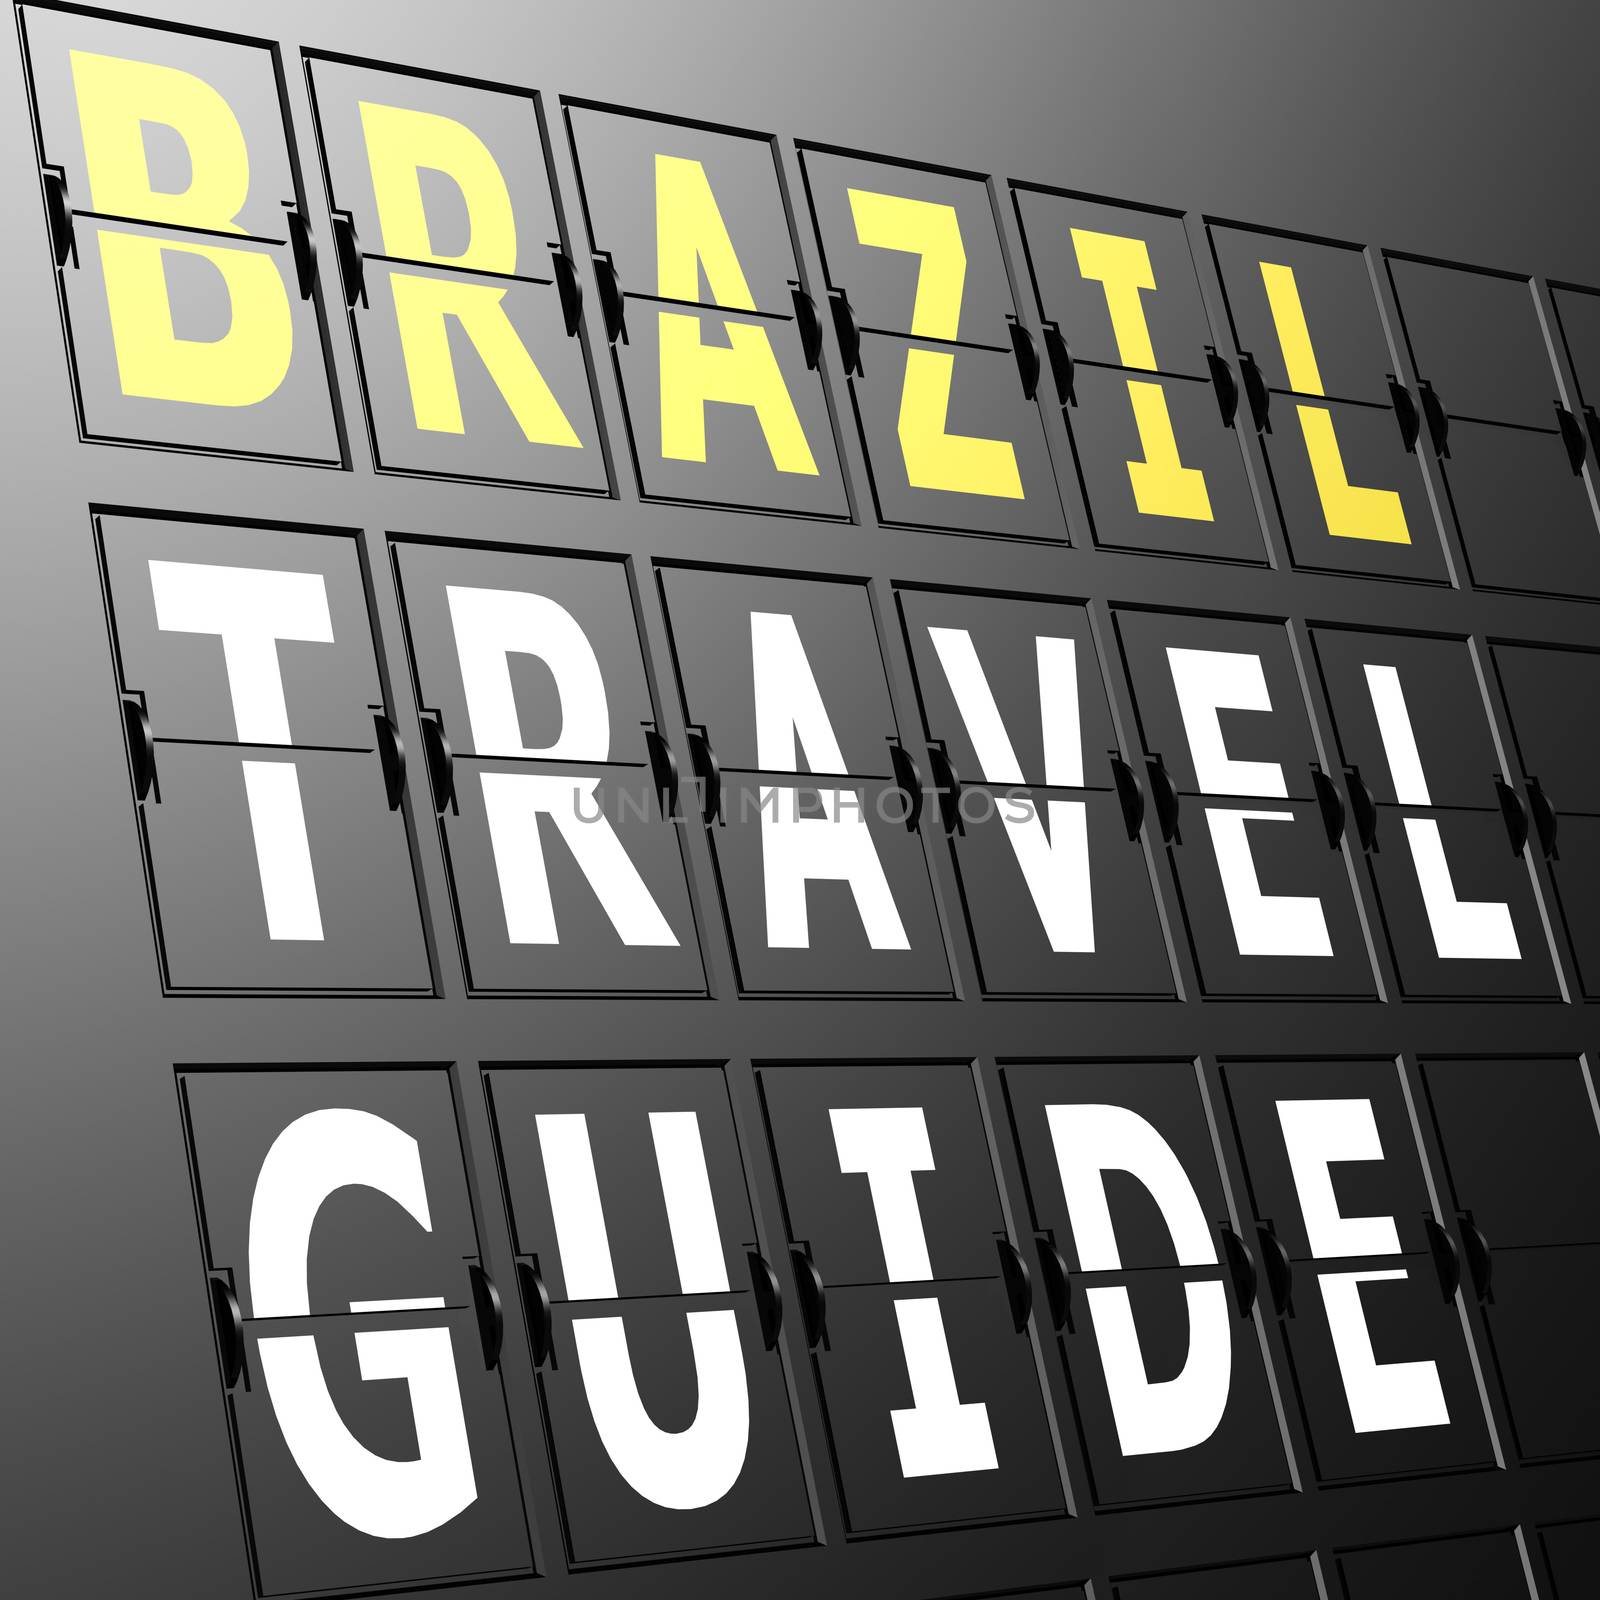 Airport display Brazil travel guide by tang90246